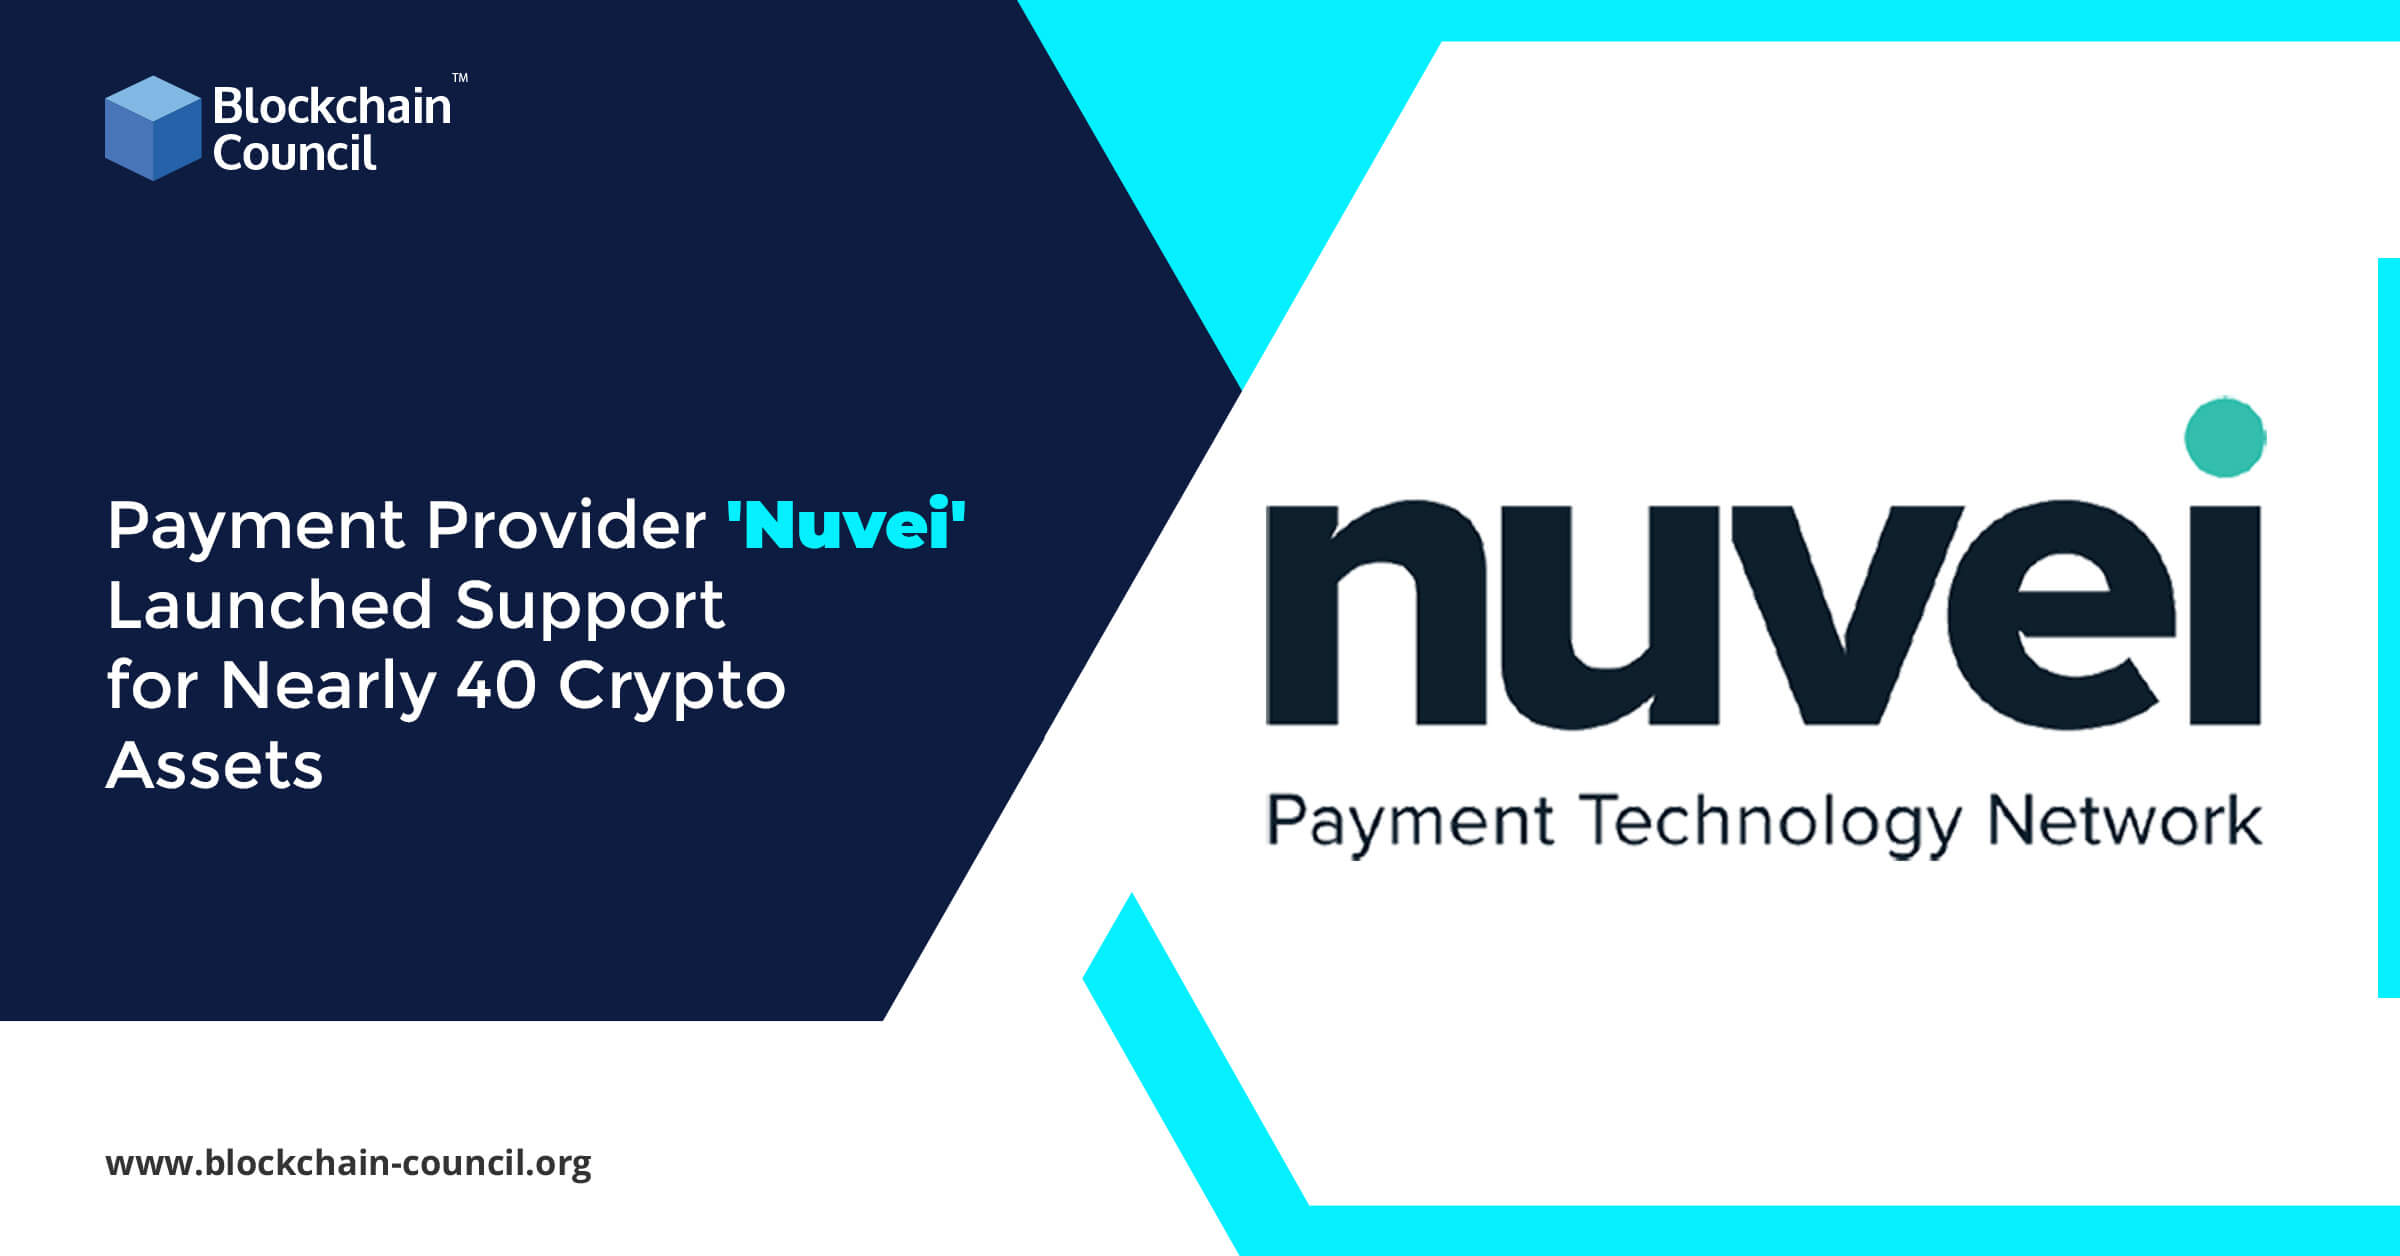 Payment Provider ‘Nuvei’ Launched Support for Nearly 40 Crypto Assets